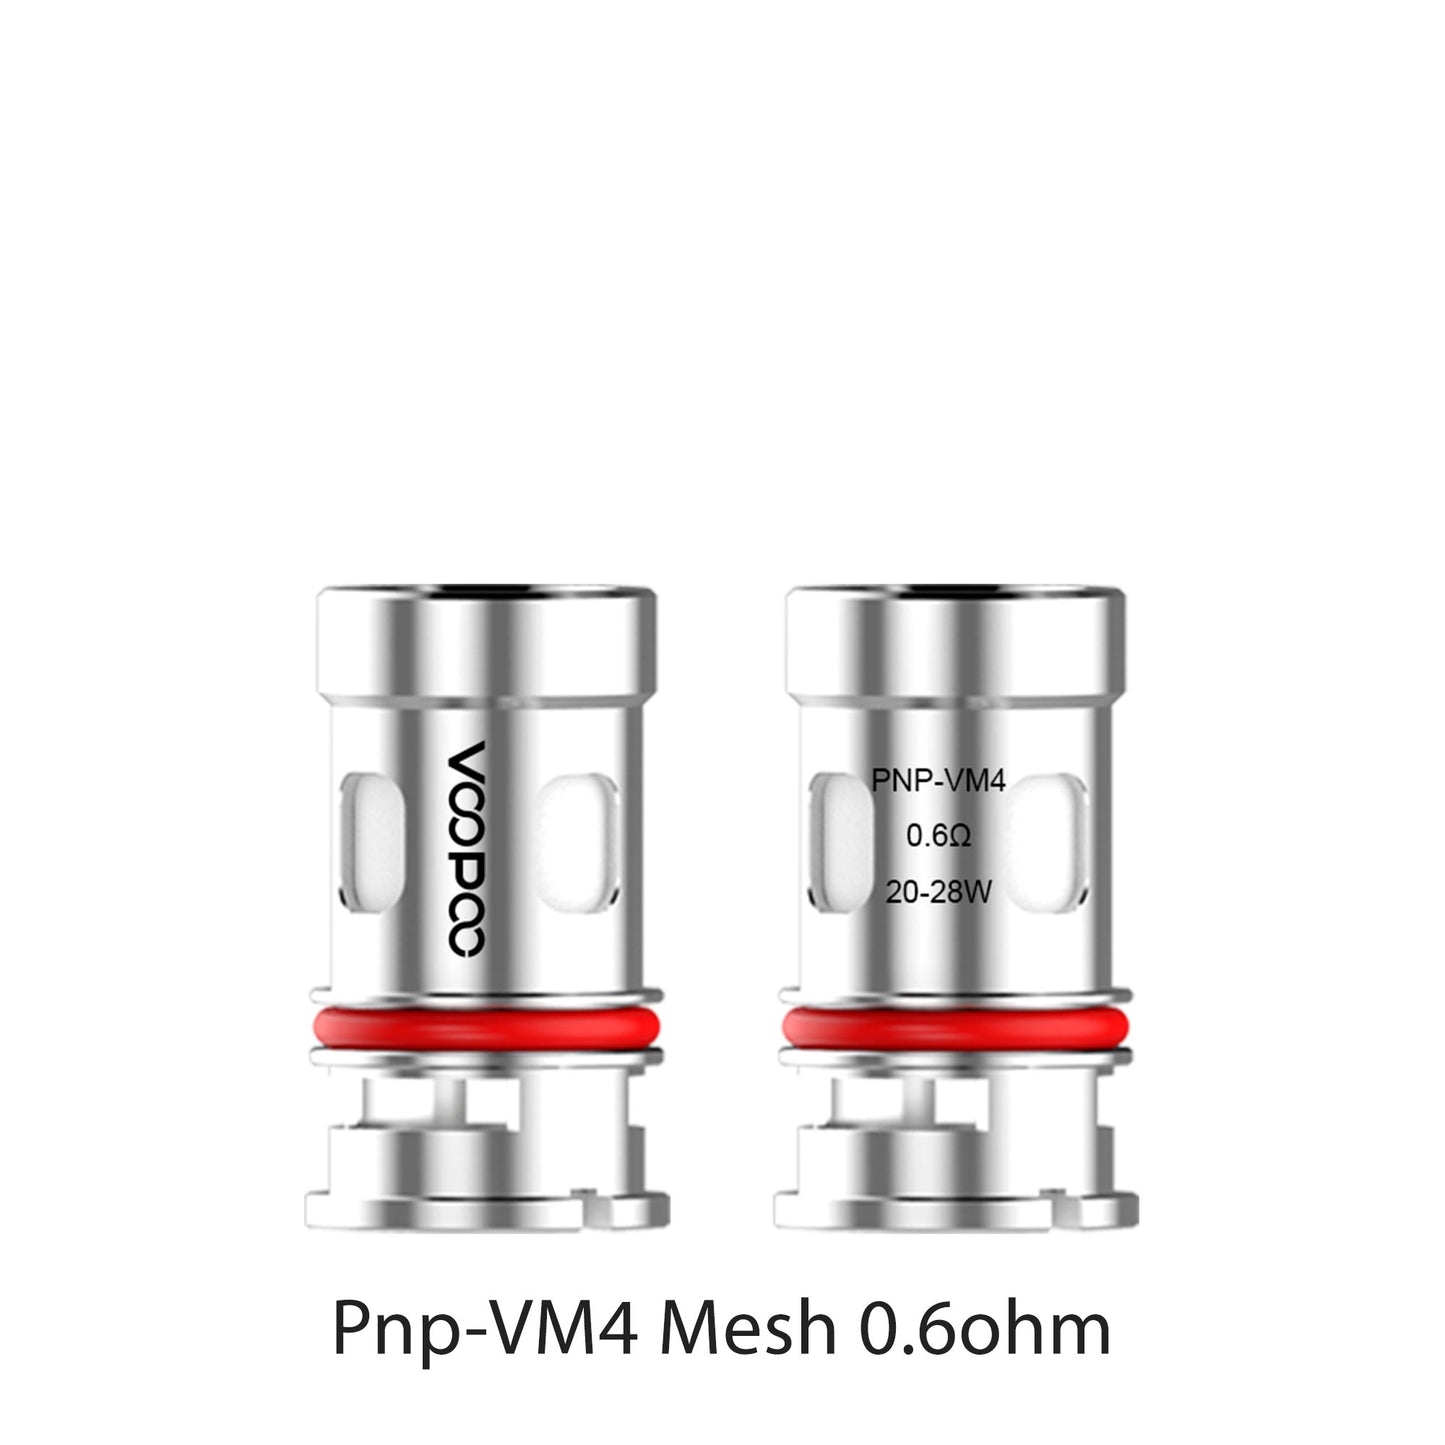 Voopoo PnP Replacement Coils 5-pack